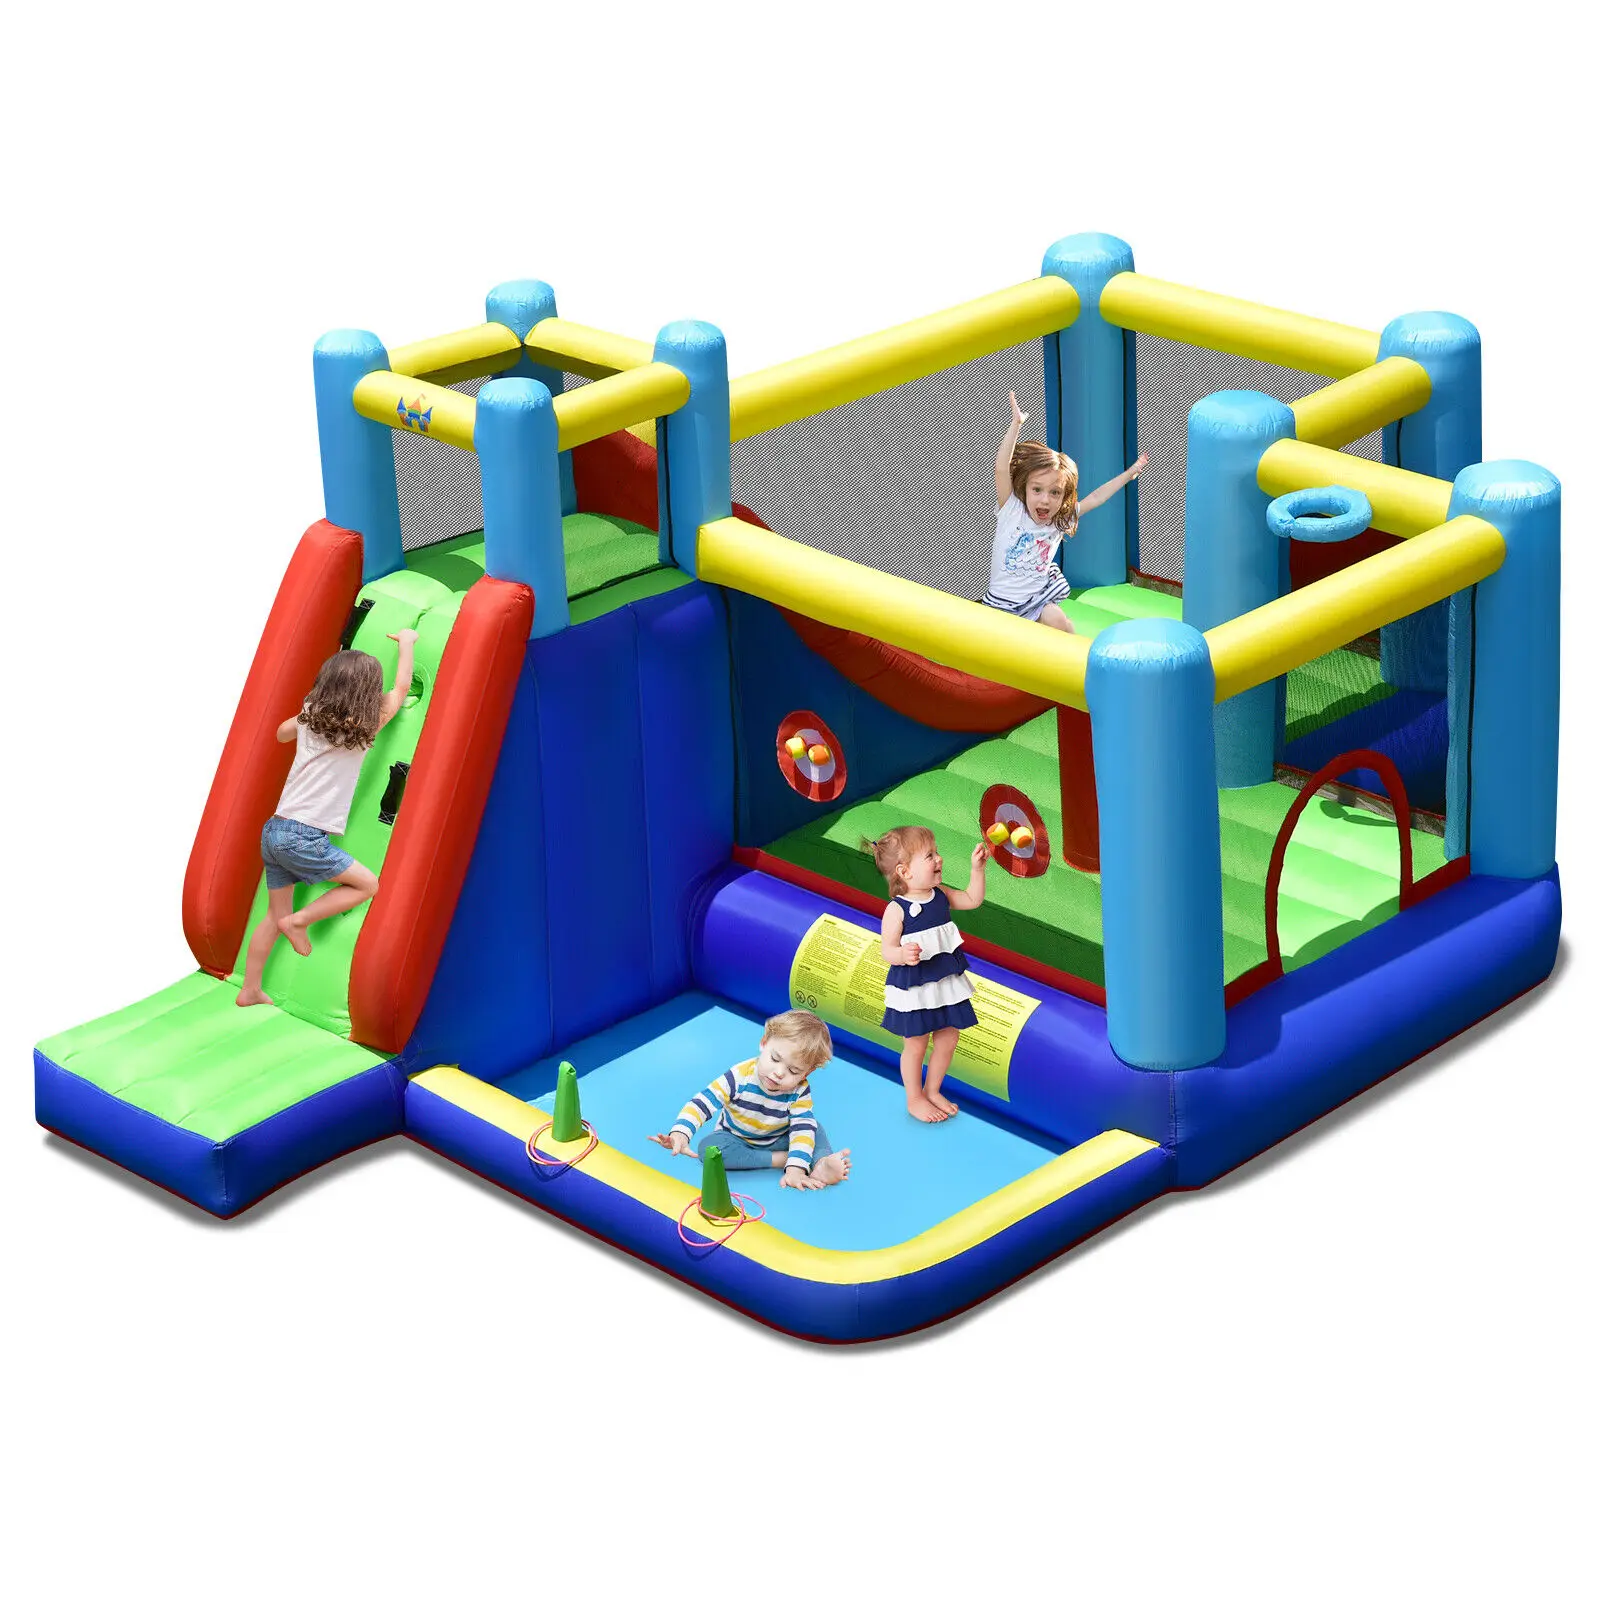 Costway Inflatable Bounce House 8-in-1 Kids Inflatable Bouncer W/ Slide (Without Blower)